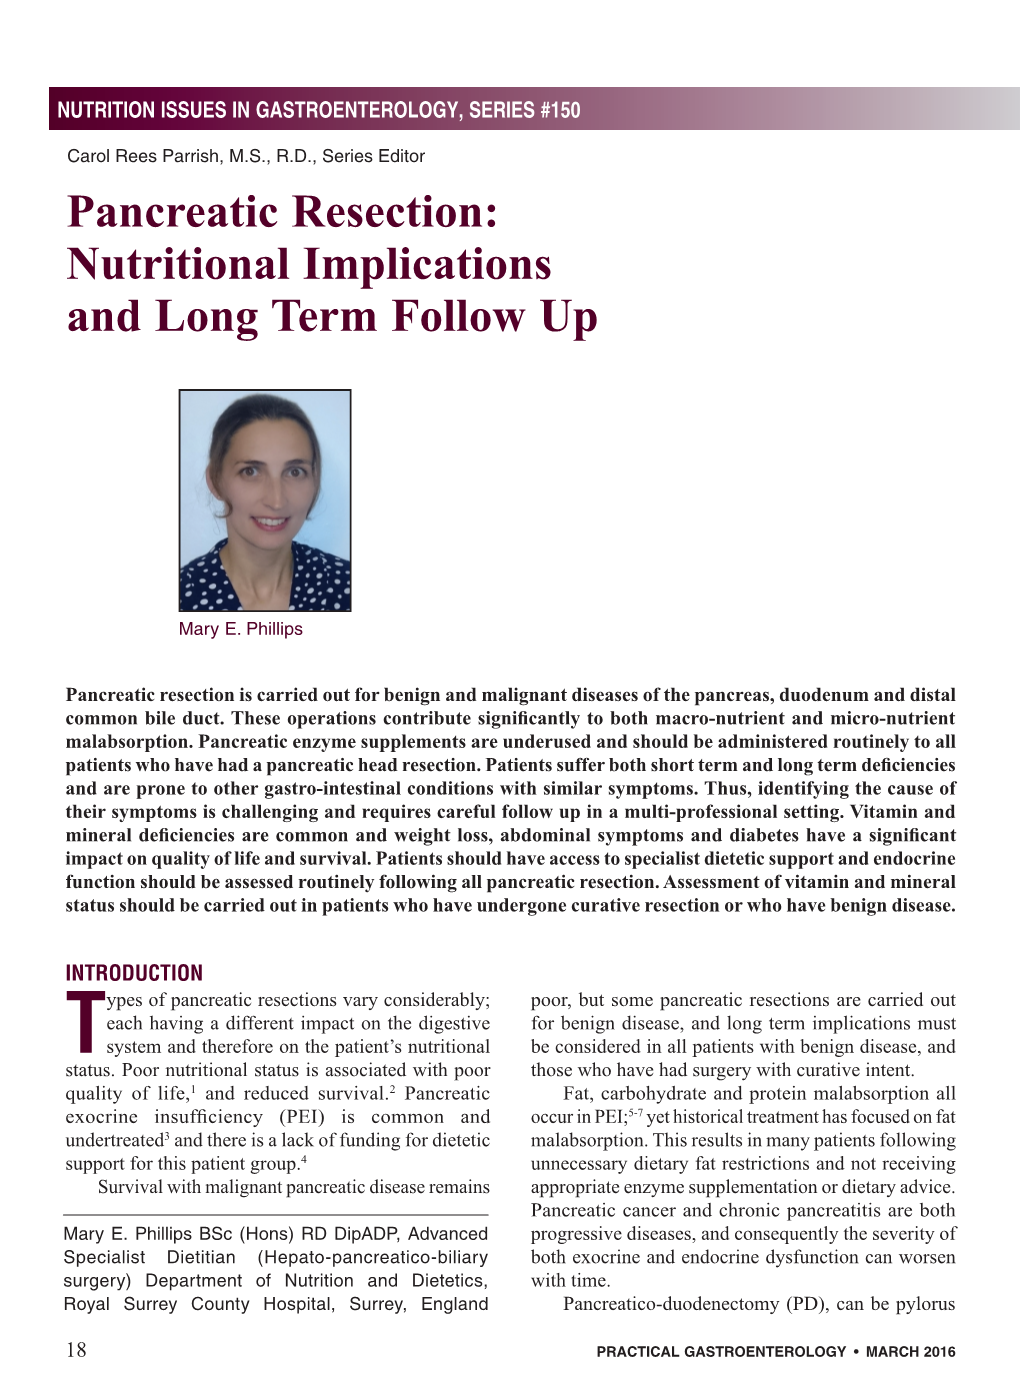 Pancreatic Resection: Nutritional Implications and Long Term Follow Up